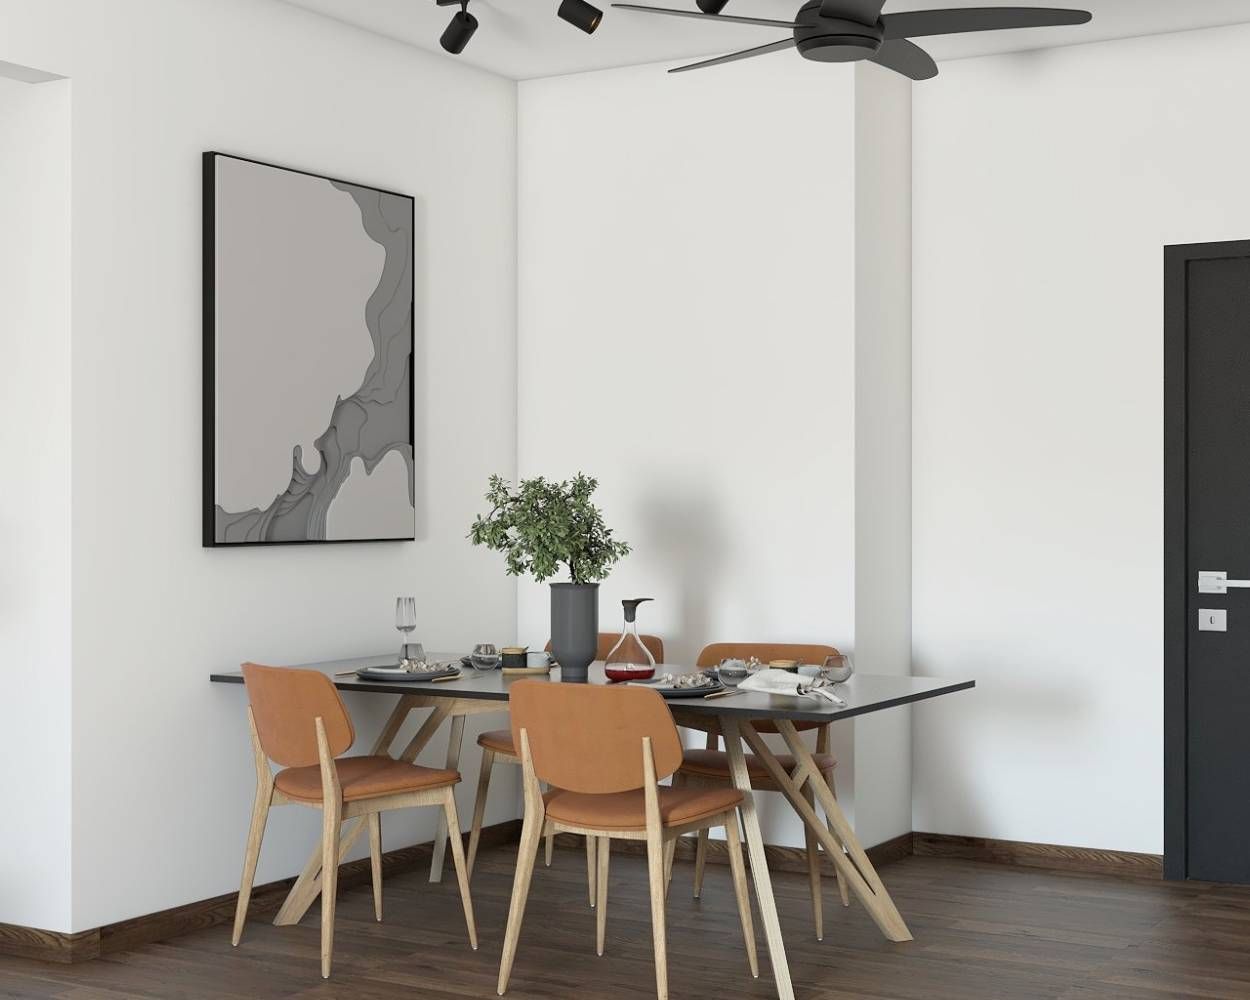 Contemporary Dining Room Design With Dark Wood And Tan Chairs